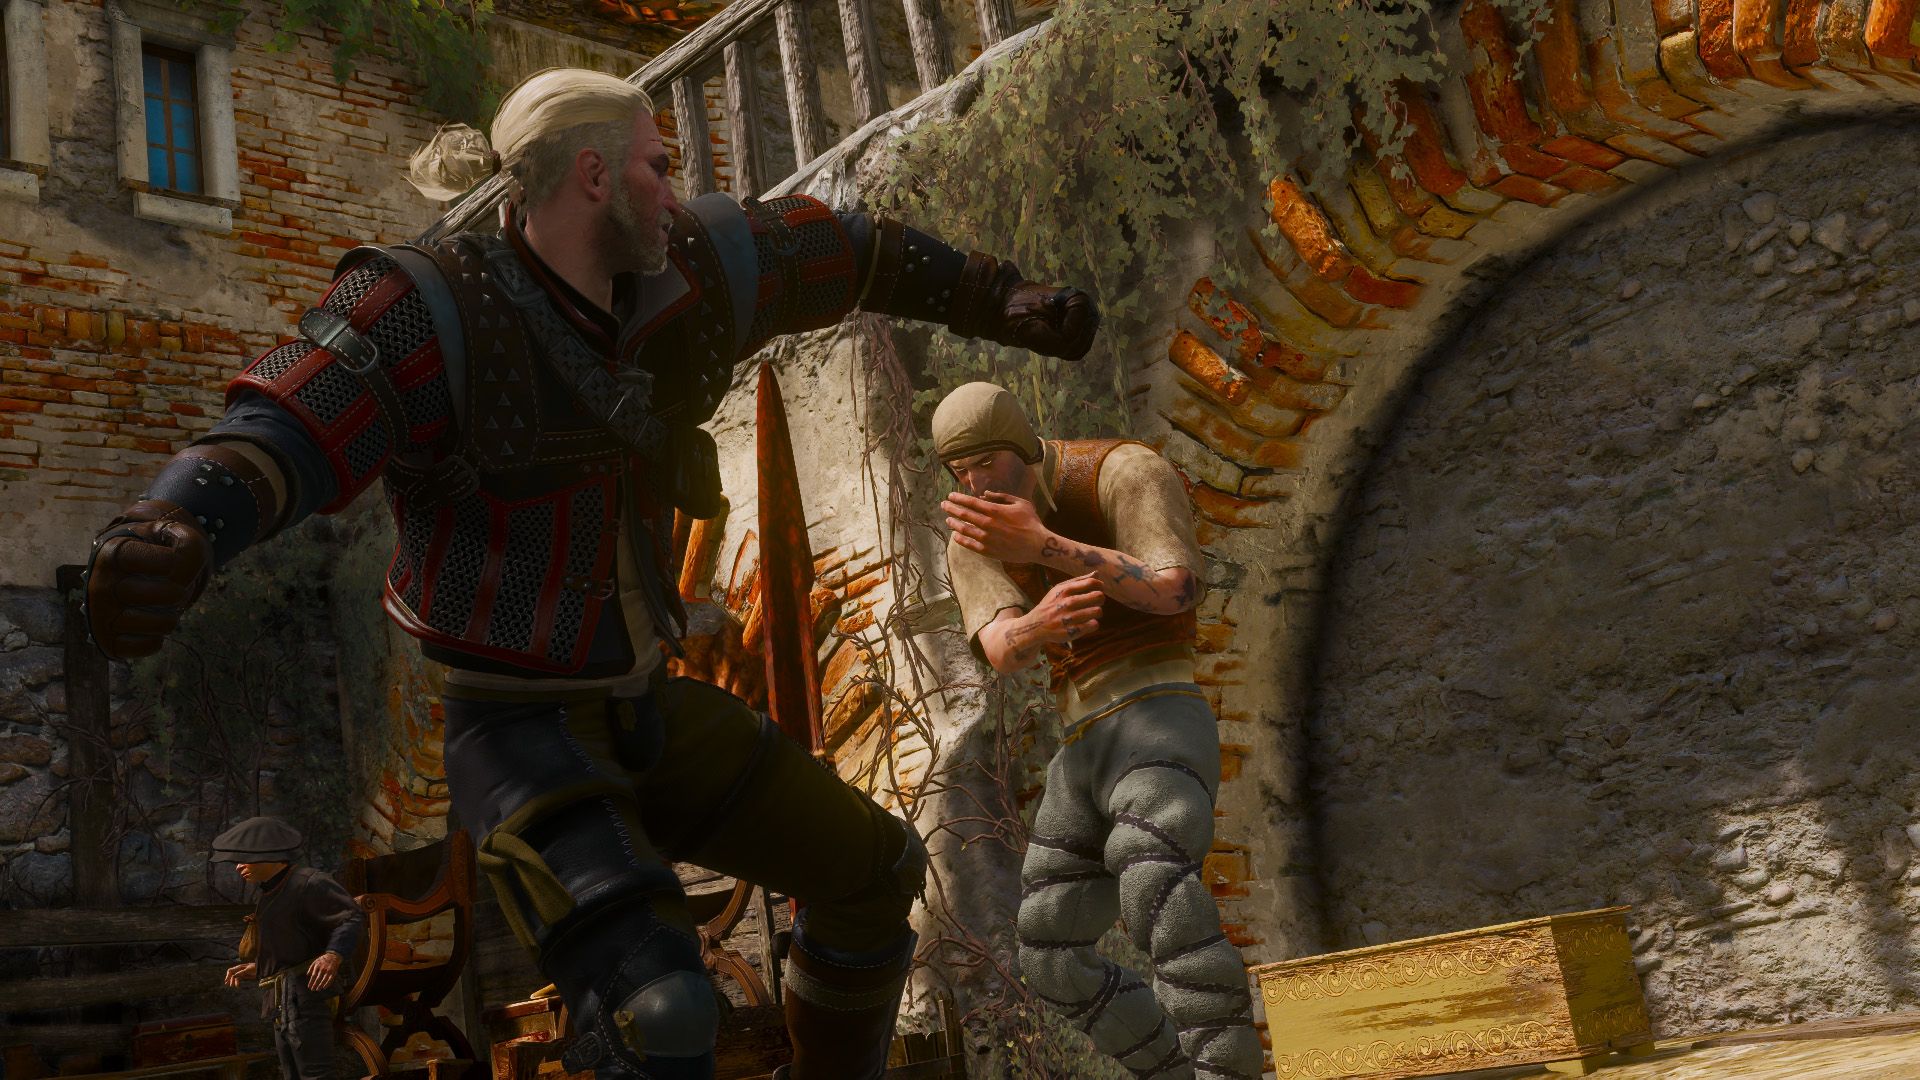 Geralt throws his arms back as he prepares to punch a man in the face.